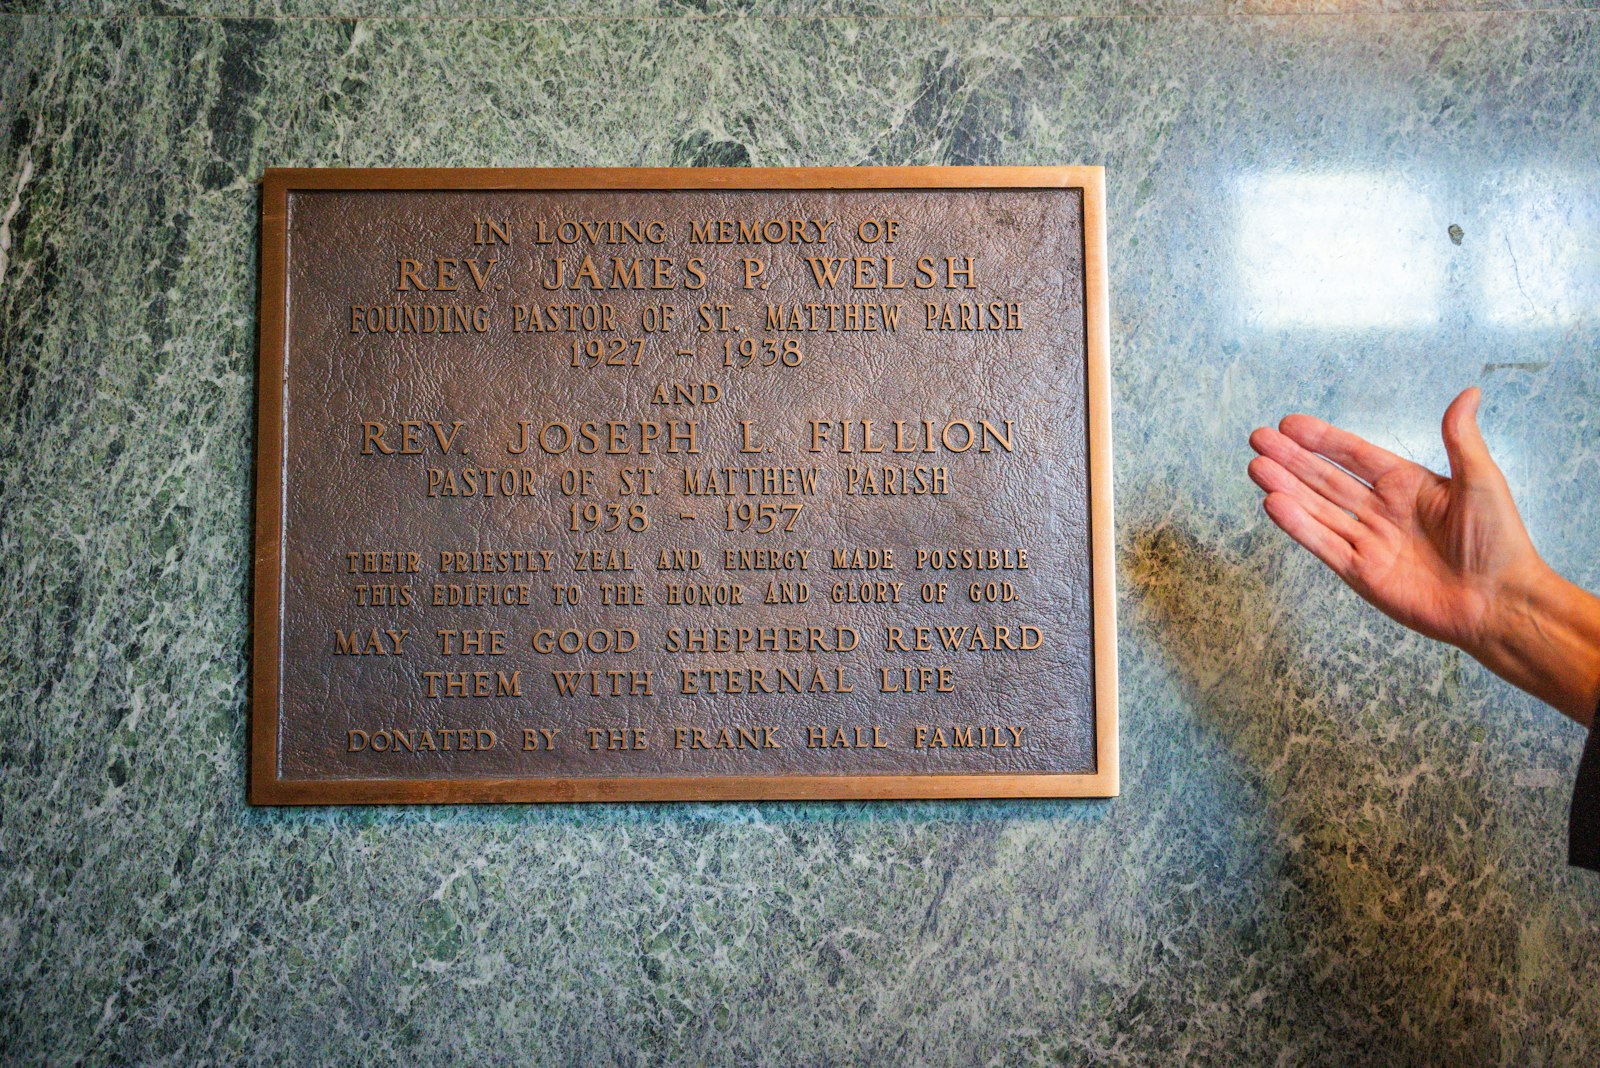 A plaque commemorating Fr. James P. Welsh, founding pastor of St. Matthew, and Fr. Joseph L. Fillion, the second pastor of St. Matthew Parish, from 1937-56, who oversaw construction of the current St. Matthew Church.